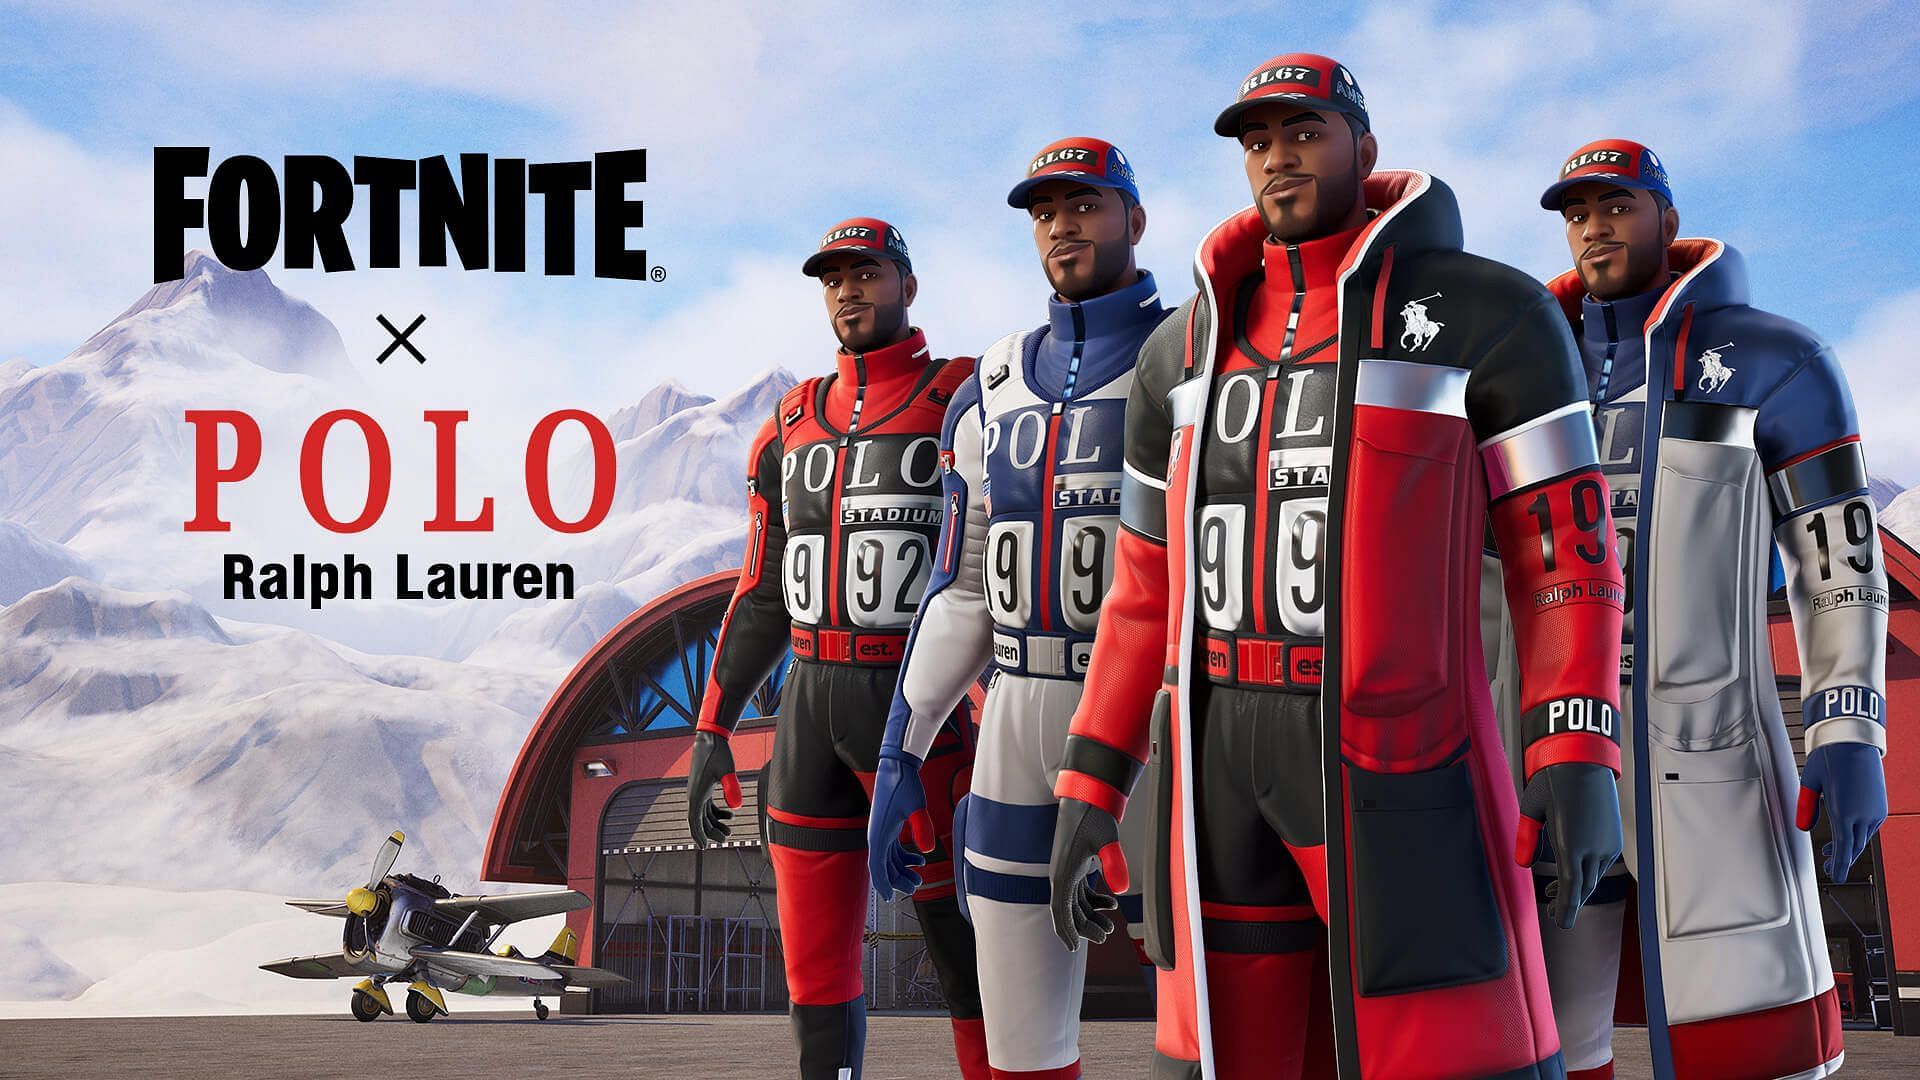 Fortnite x Polo (Ralph Lauren) collaboration Skins, release date, and more explained